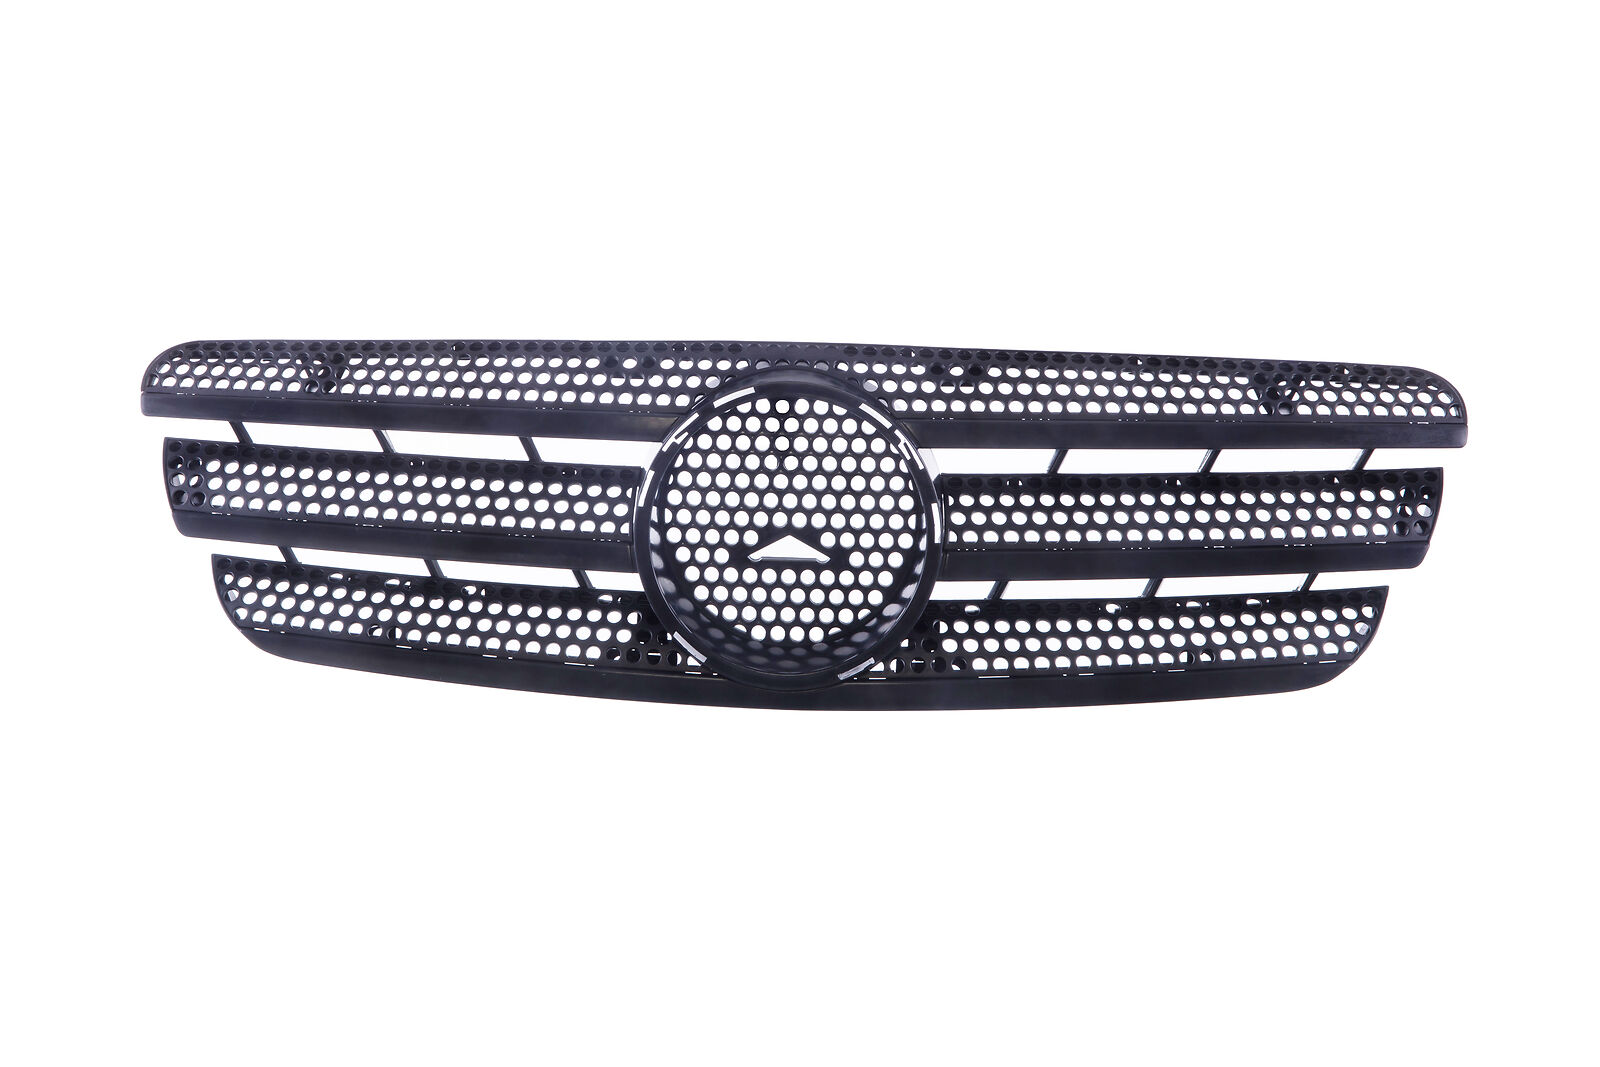 Grille Assembly for 1998-2005 Mercedes Benz ML320 2003-2005 ML350 W163 MB1200139